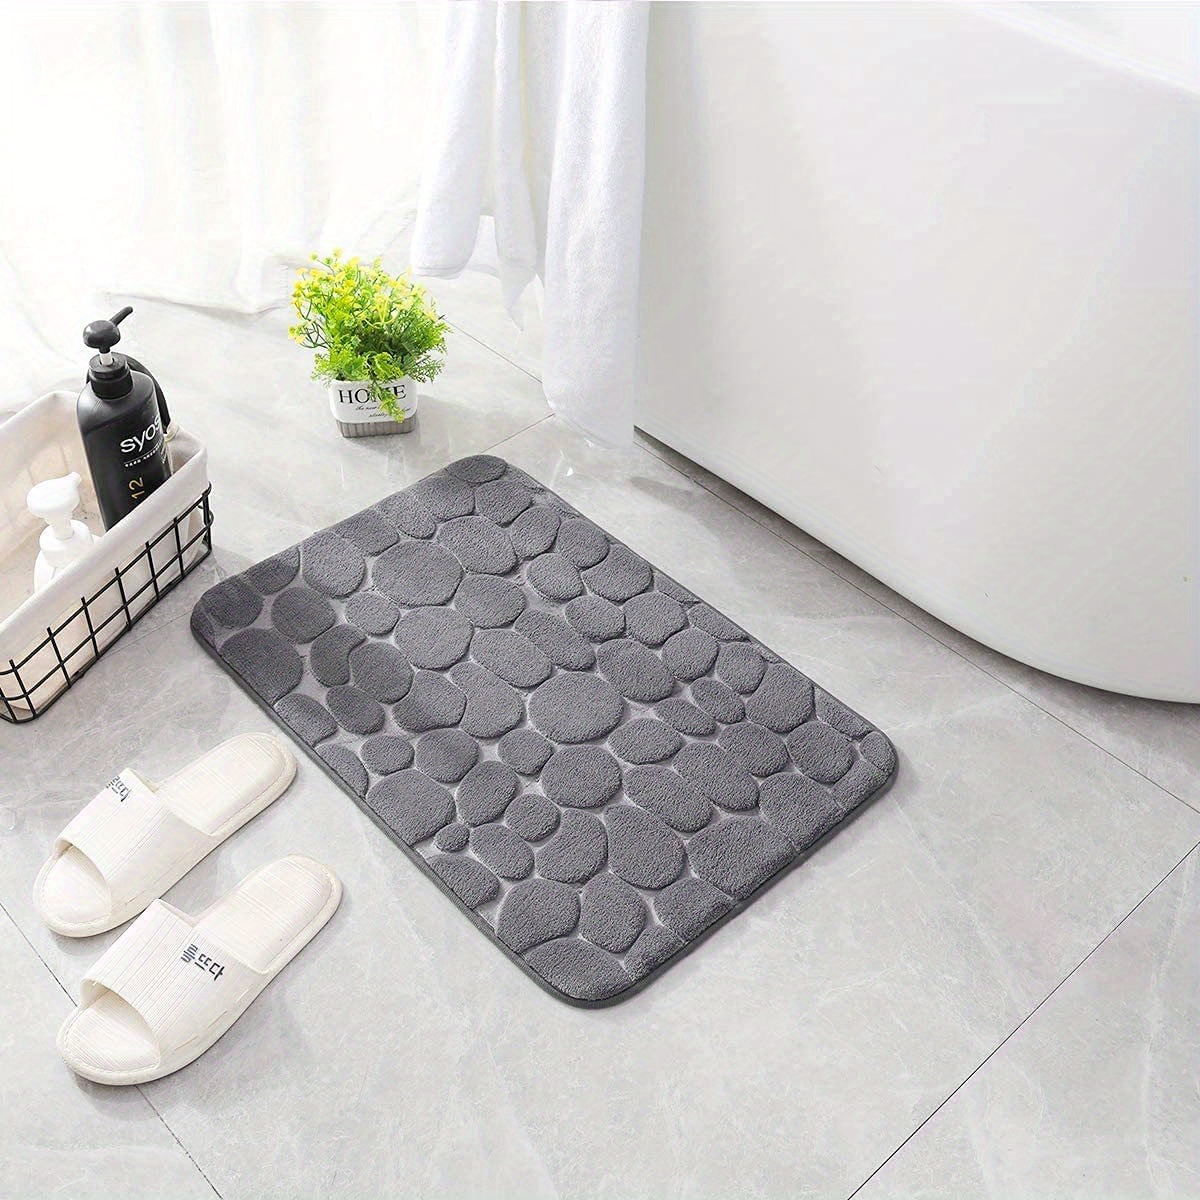 1pc memory foam bath rug cobblestone embossed bathroom mat rapid water absorbent and washable bath rugs non slip thick soft and comfortable carpet for shower room bathroom accessories details 3